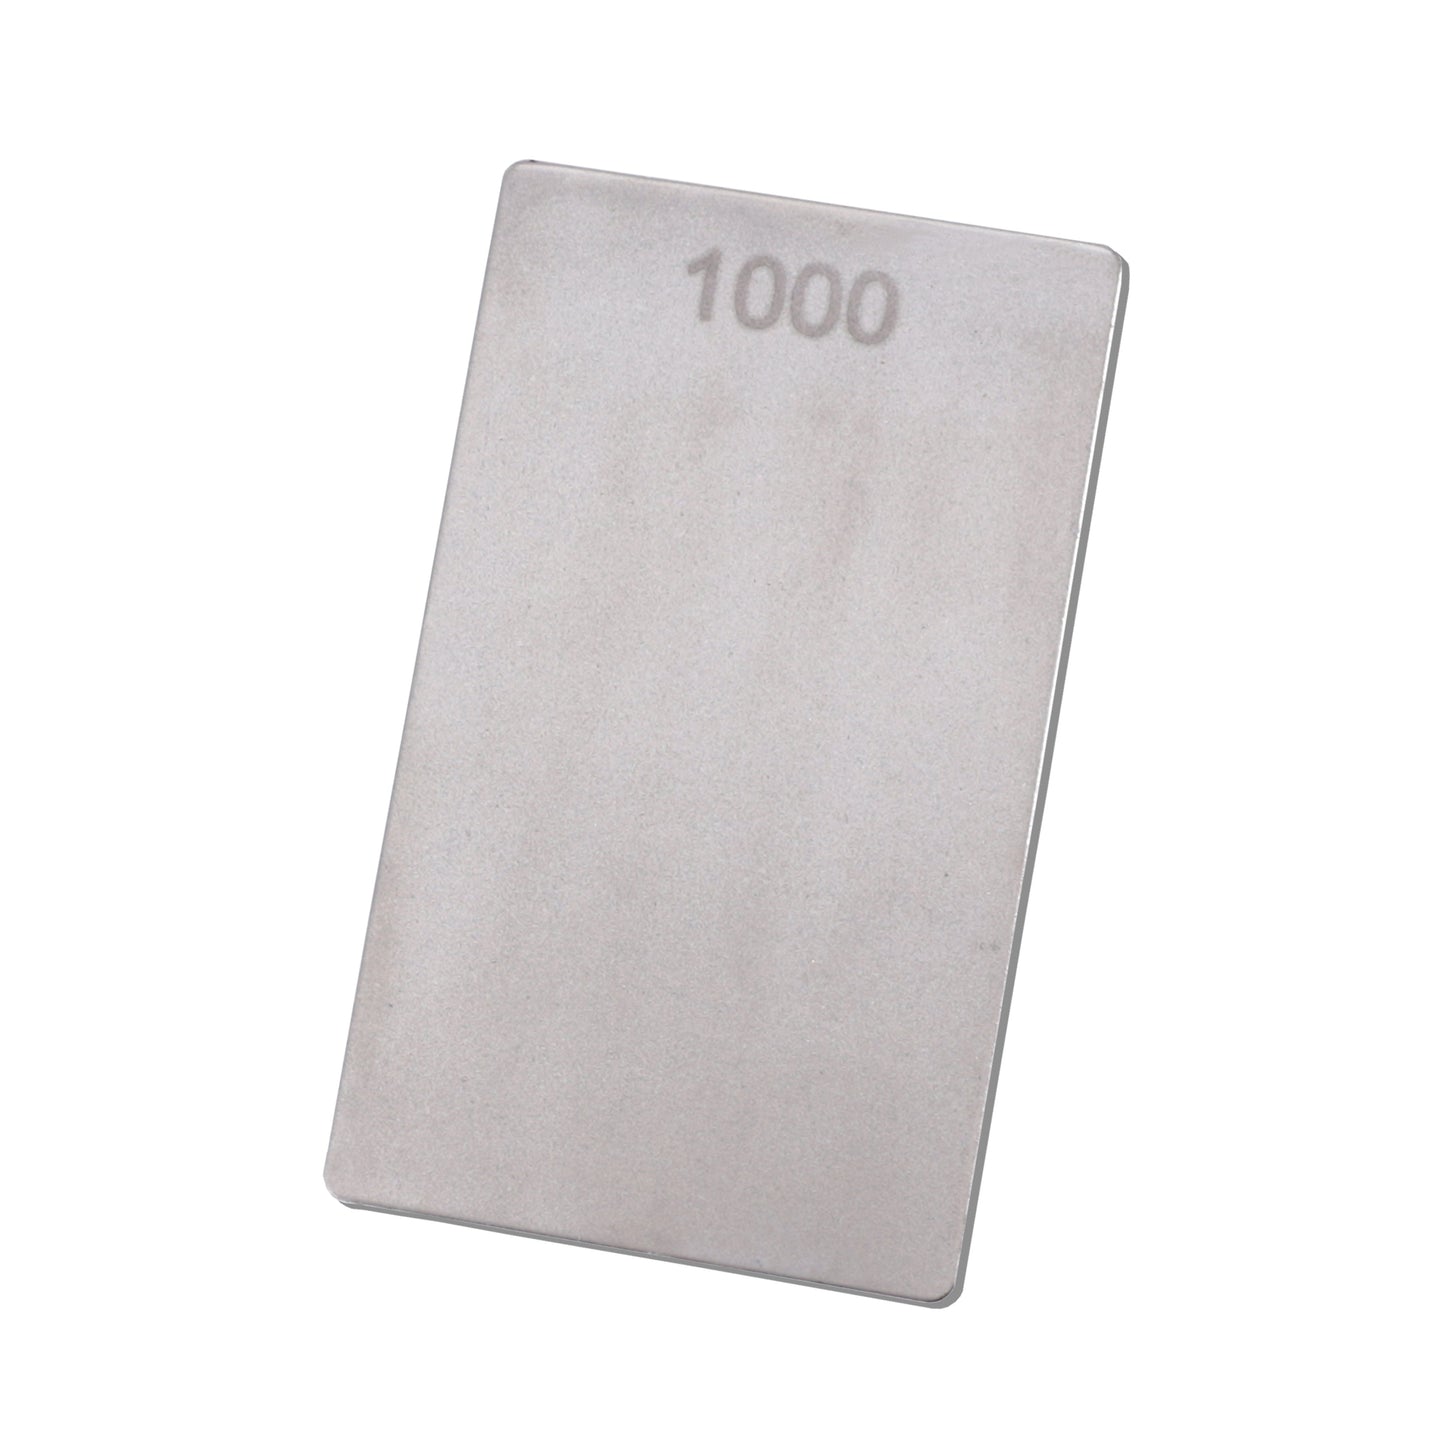 3" x 2" Double-Sided Diamond Credit Card Stone 1000 / 600 Grit